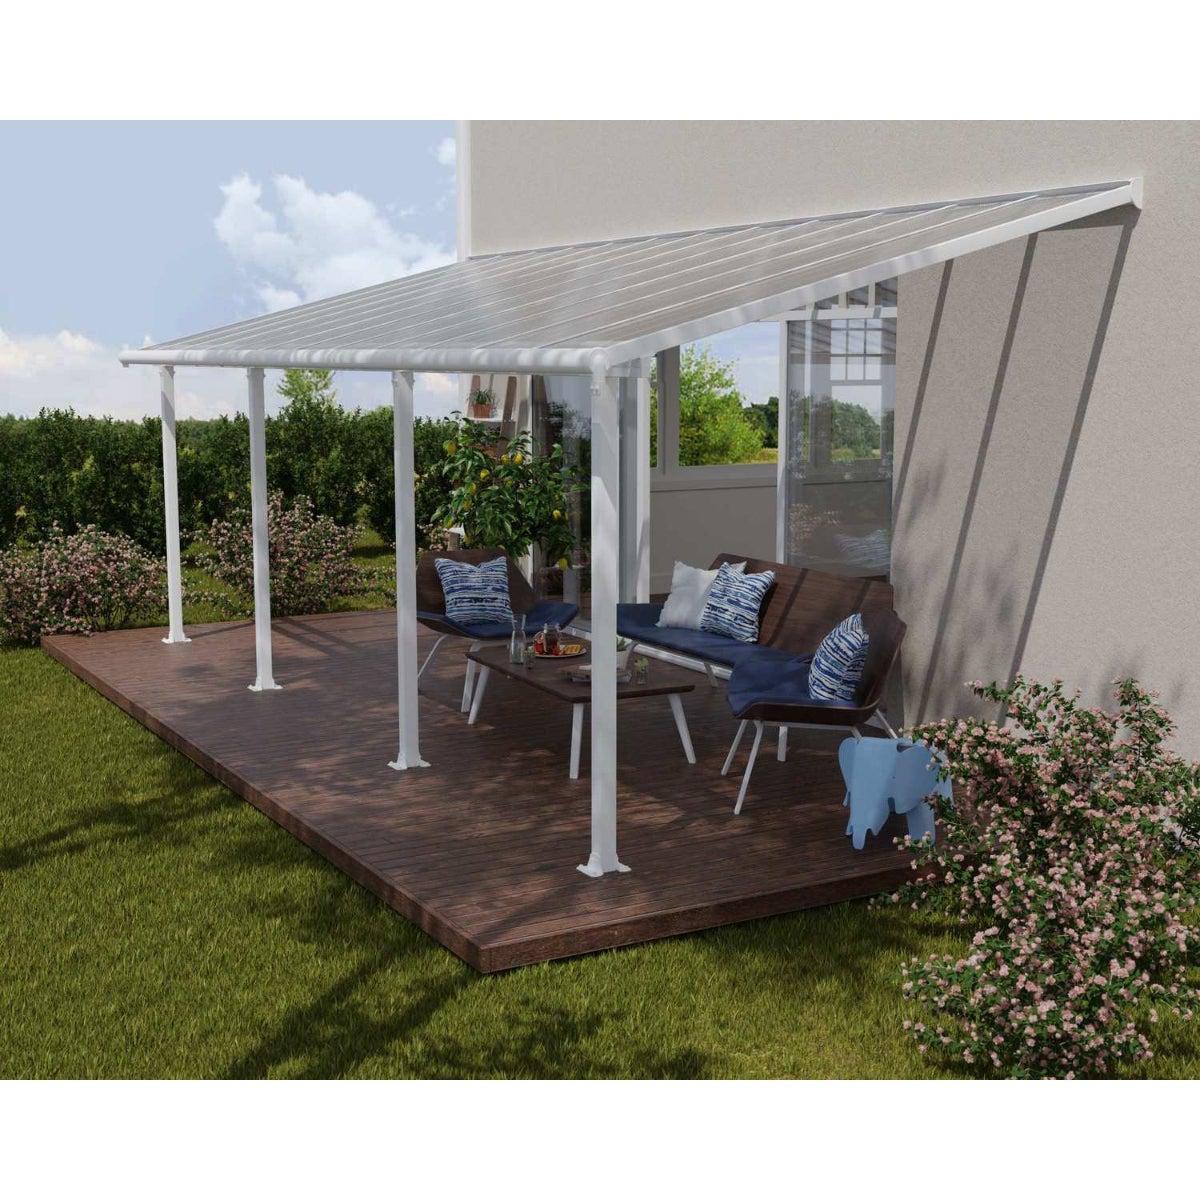 Olympia Patio Covers 10 x 24 ft. | Palram-Canopia - Delightful Yard